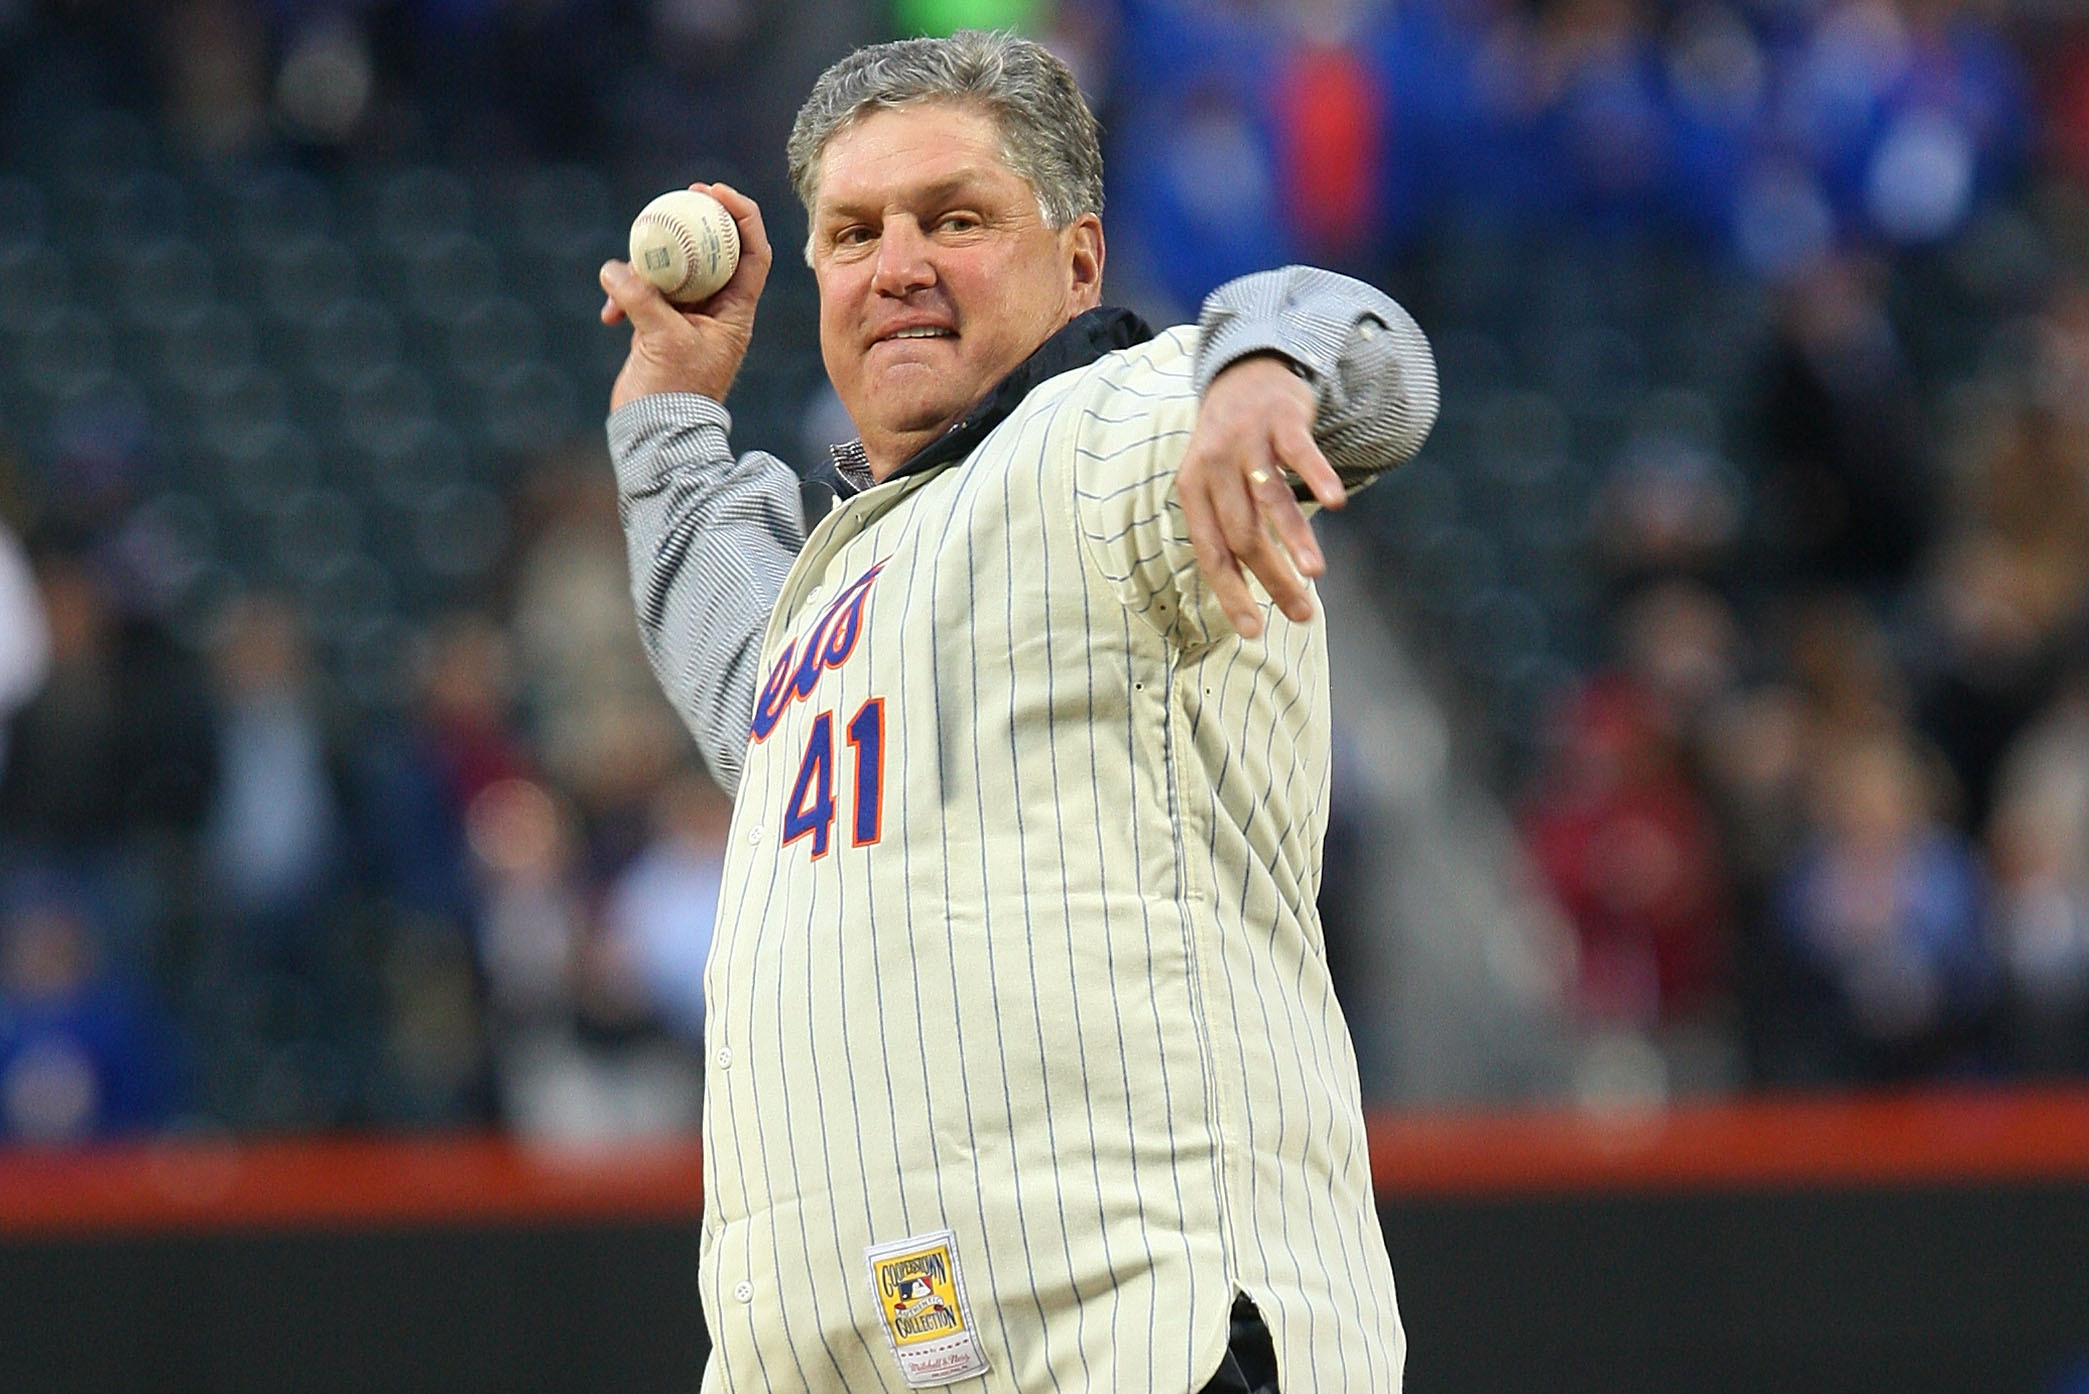 Tom Seaver says poor mechanics and overprotective teams are to